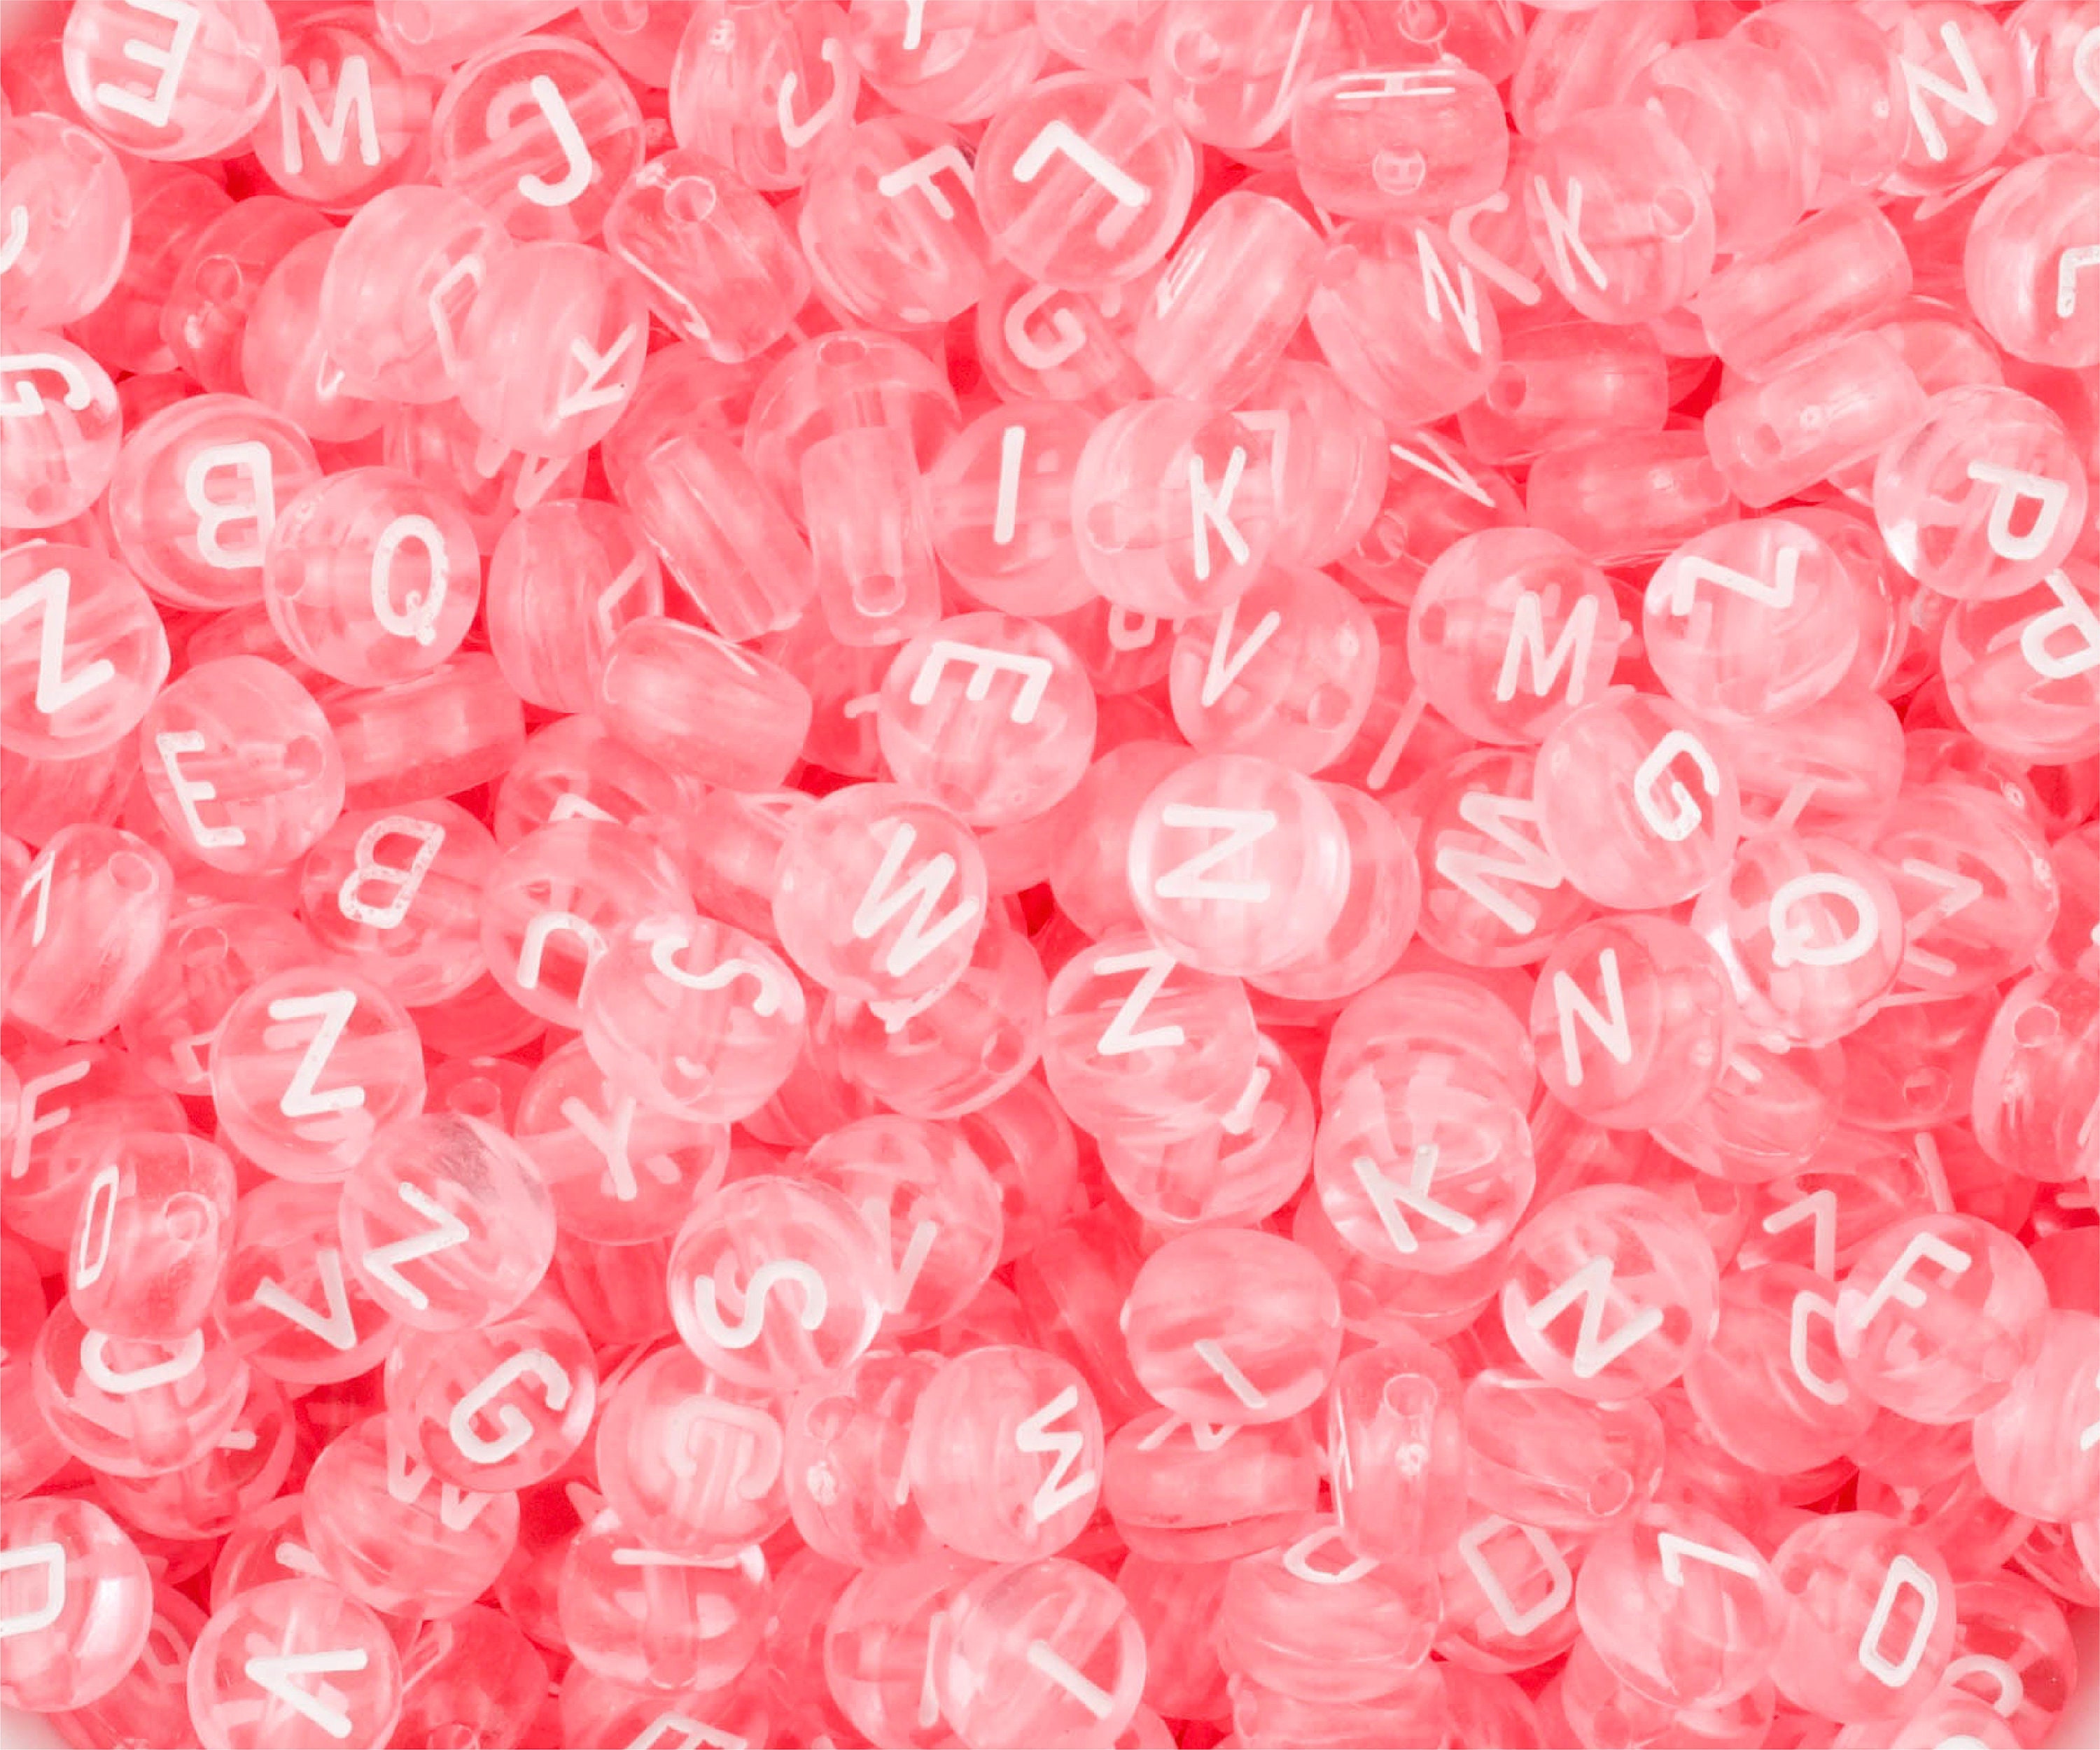 Pink Alphabet Letter Beads, Translucent Acrylic Pink Letters Beads, Round  Acrylic Beads, Mixed Letters Beads, Name Beads 7mm 357 